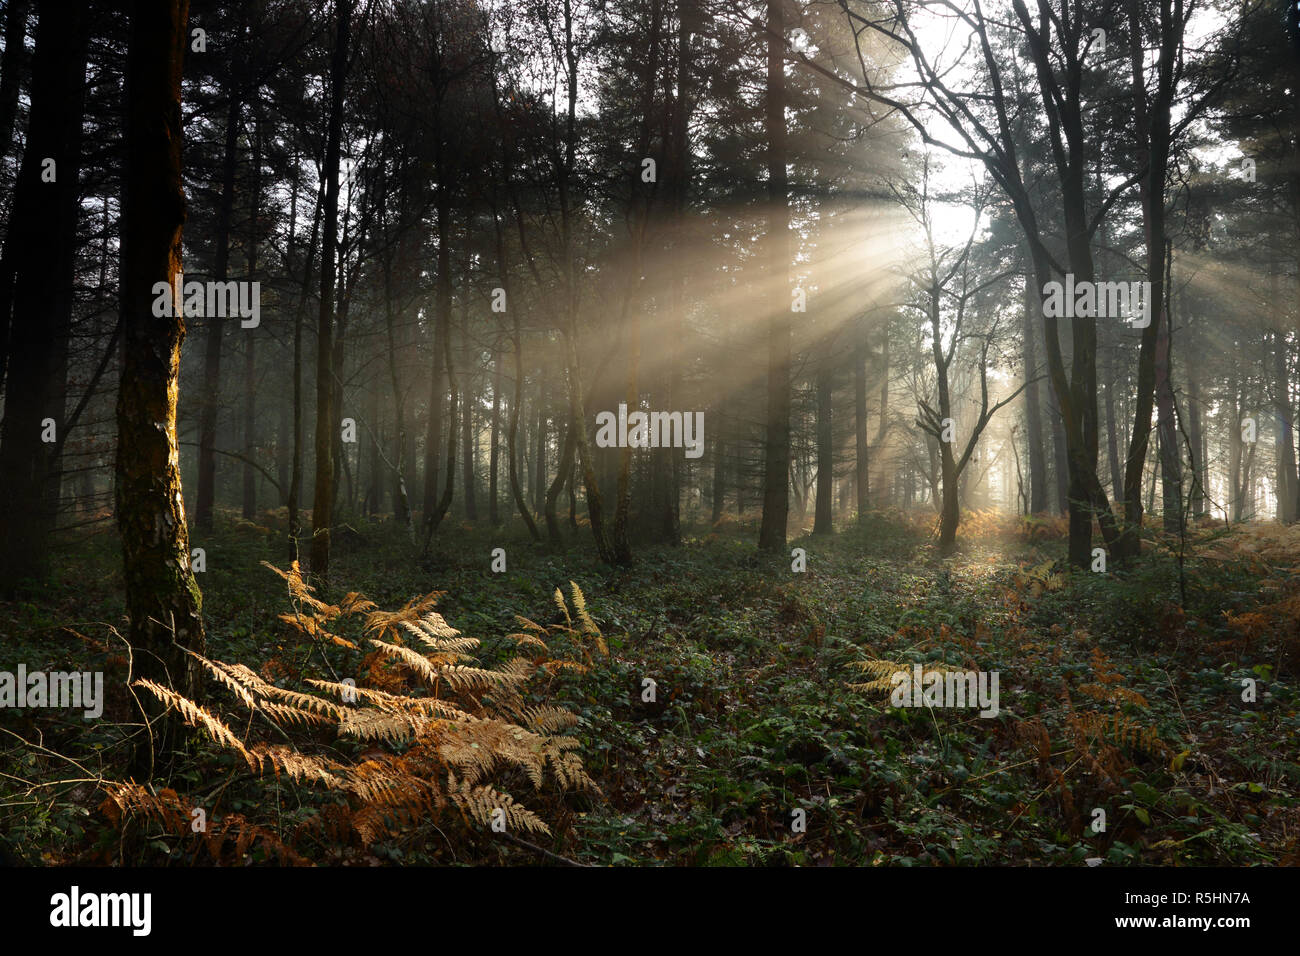 Sunlight streaming through trees in the Wyre forest, England, UK. Stock Photo